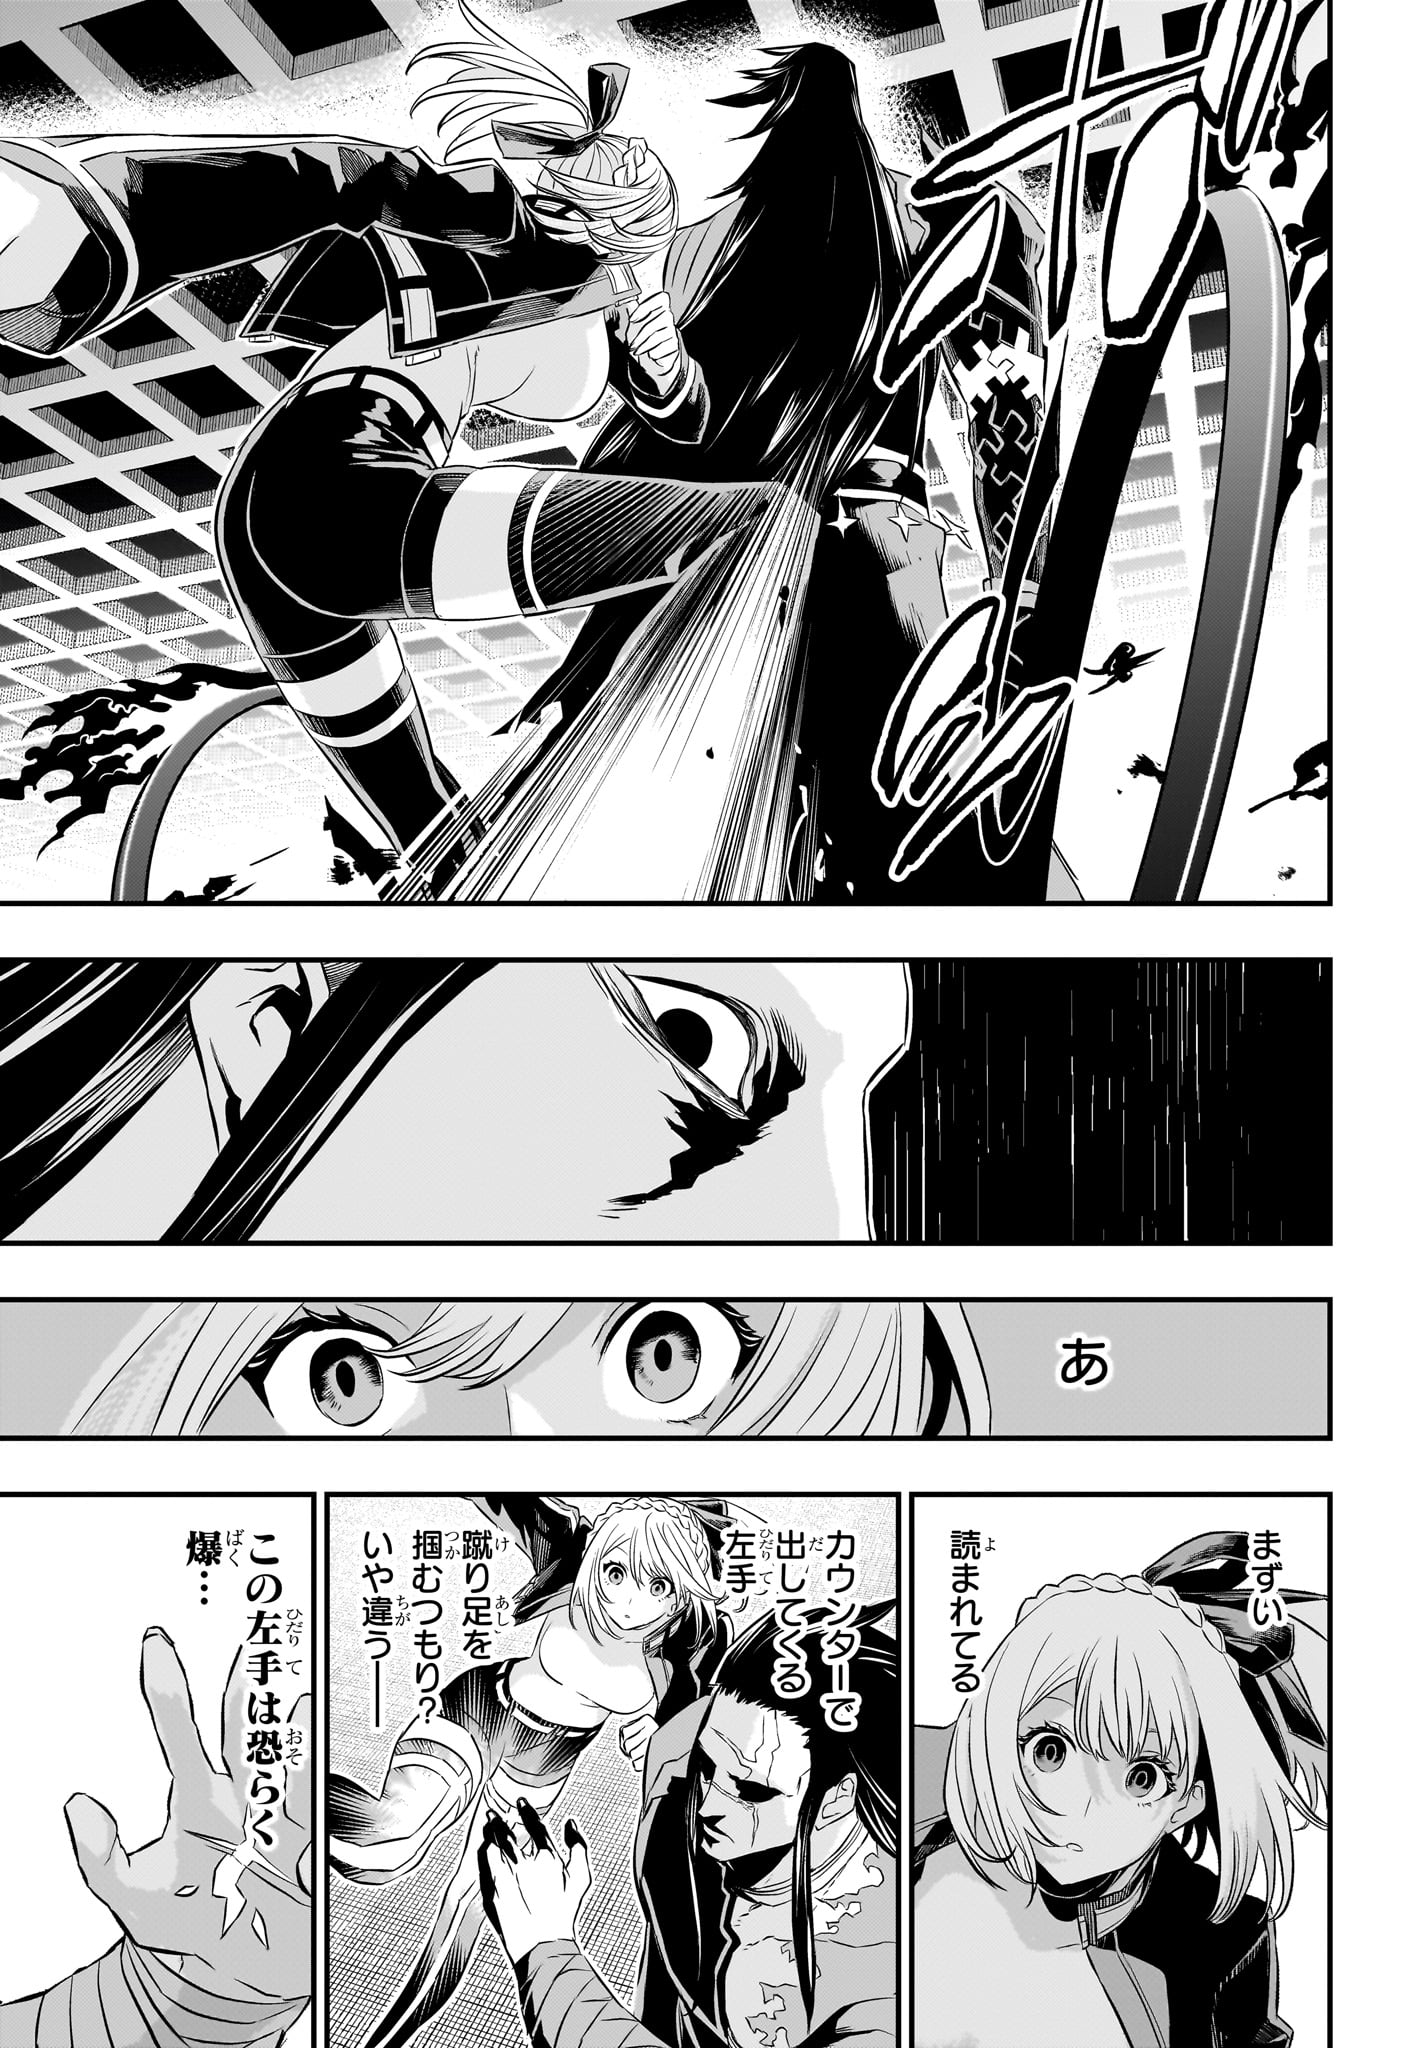 Nue no Onmyouji - Chapter 52 - Page 11